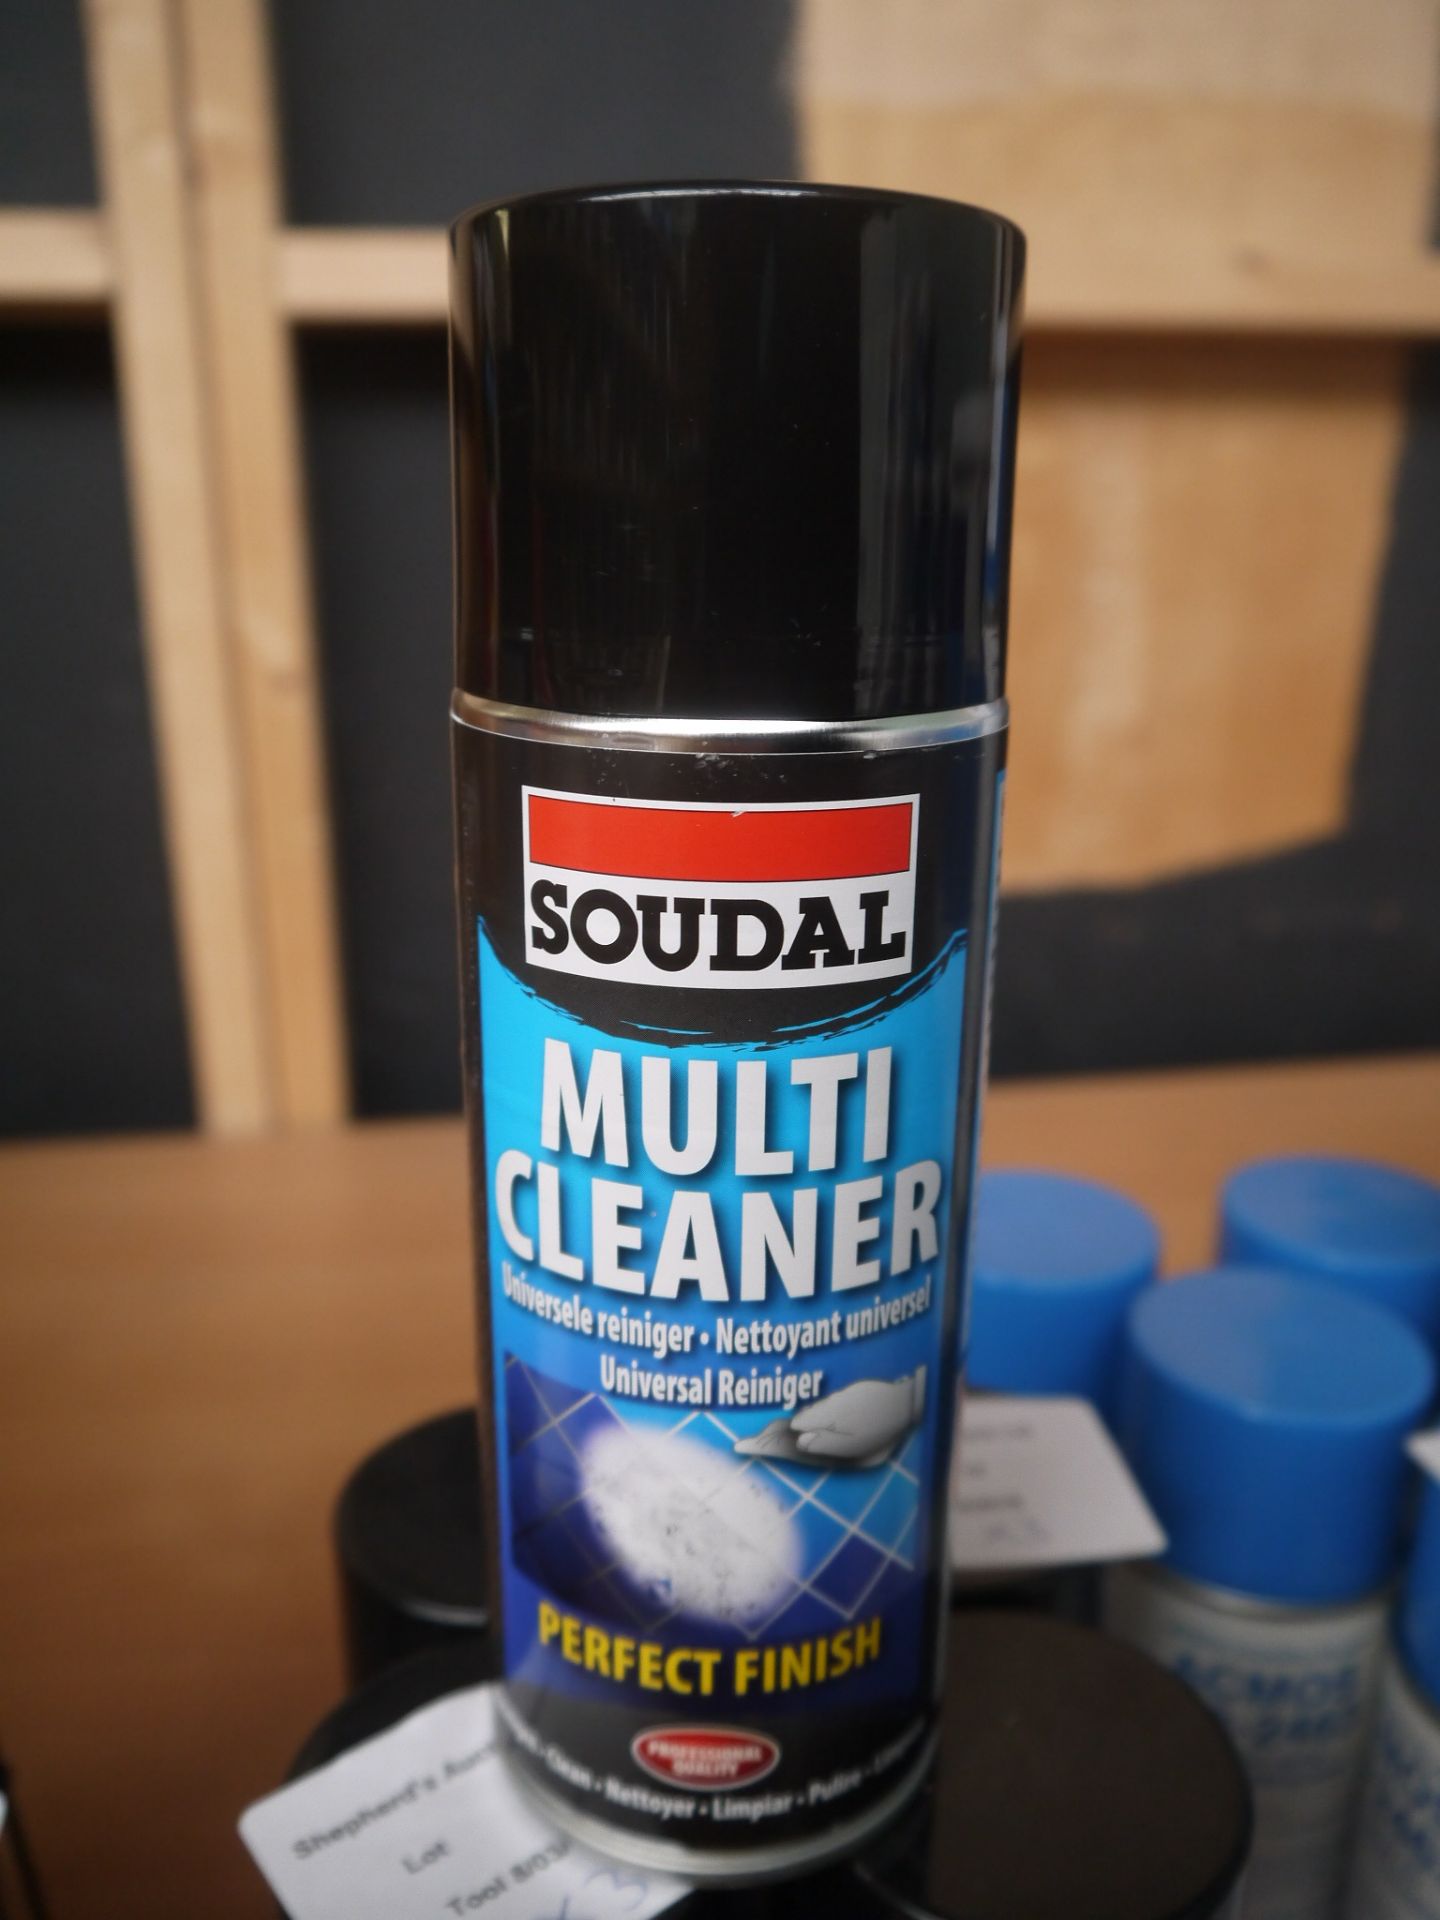 3x 400 ml of SOUDAL Perfect Finish Multi Cleaner. New.